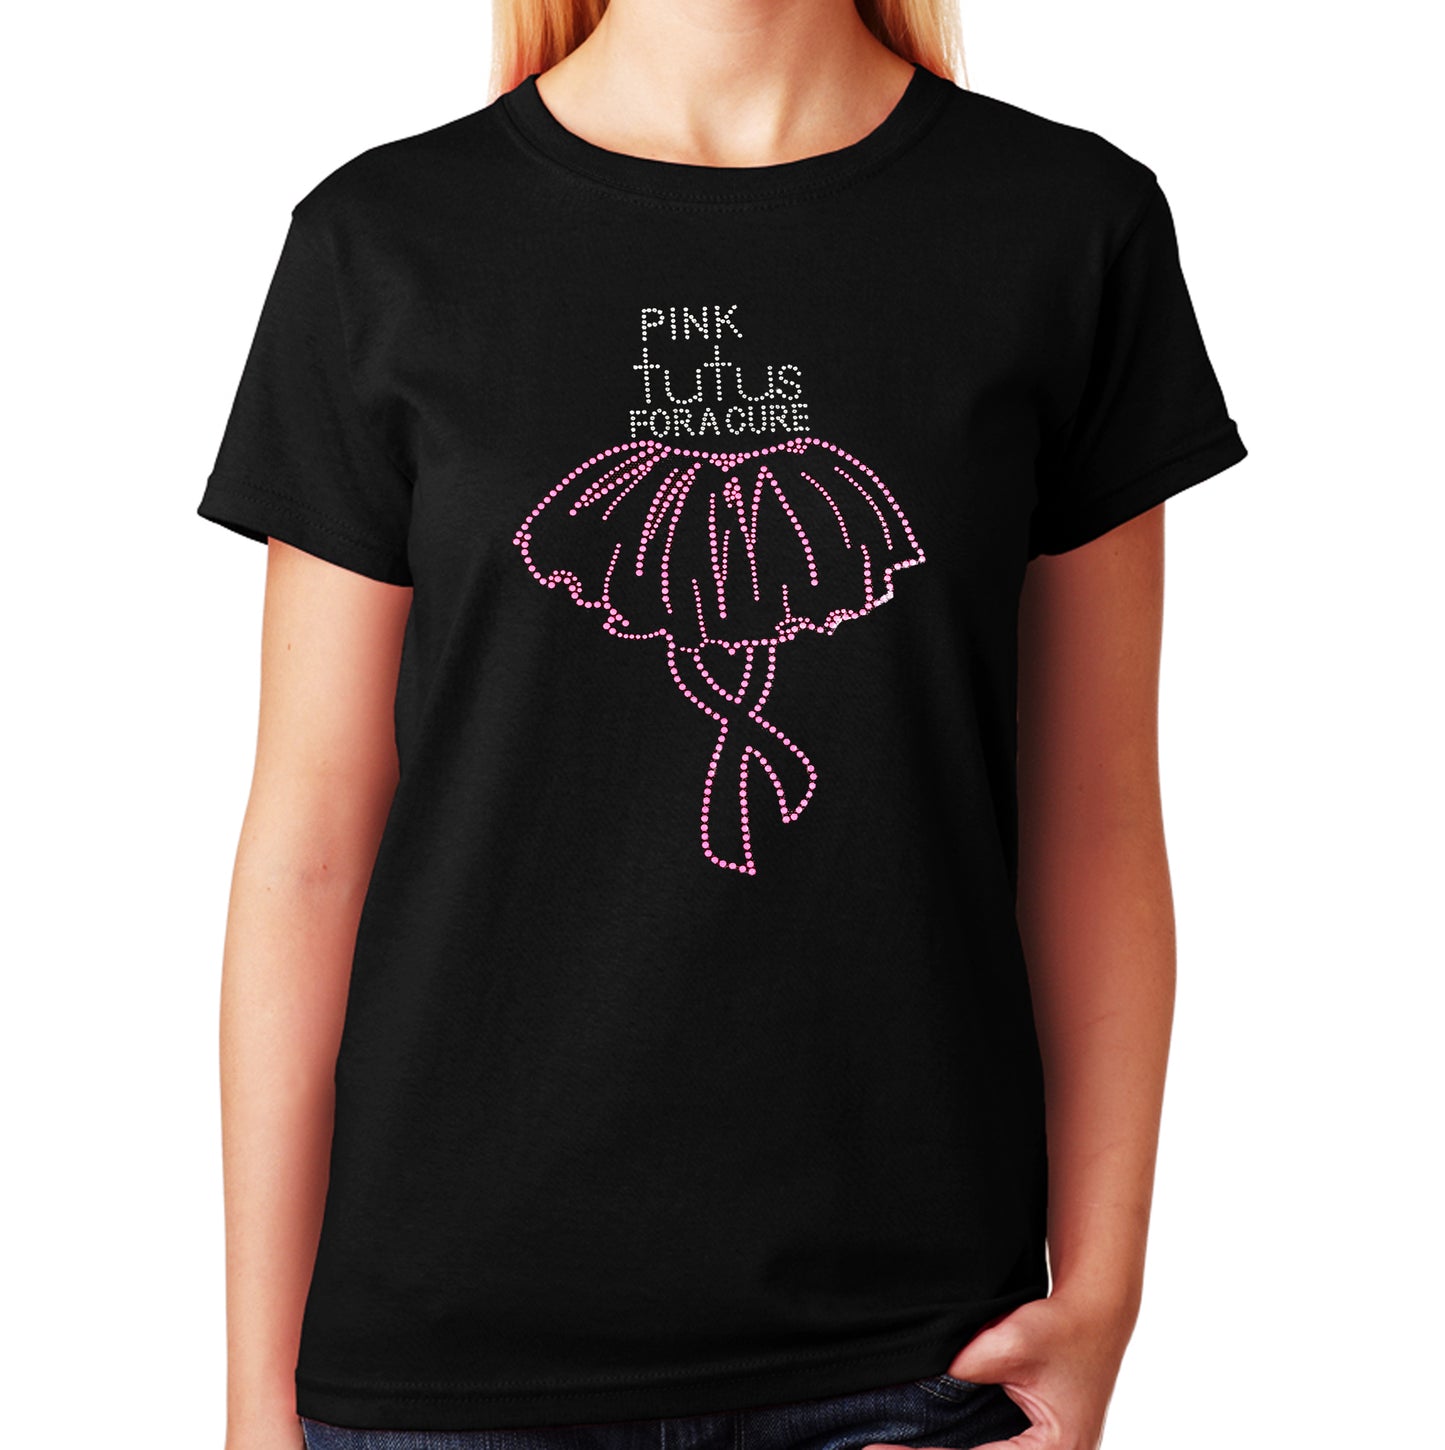 Women's / Unisex T-Shirt with Pink Tutus for a Cure Cancer Awarness in Rhinestones